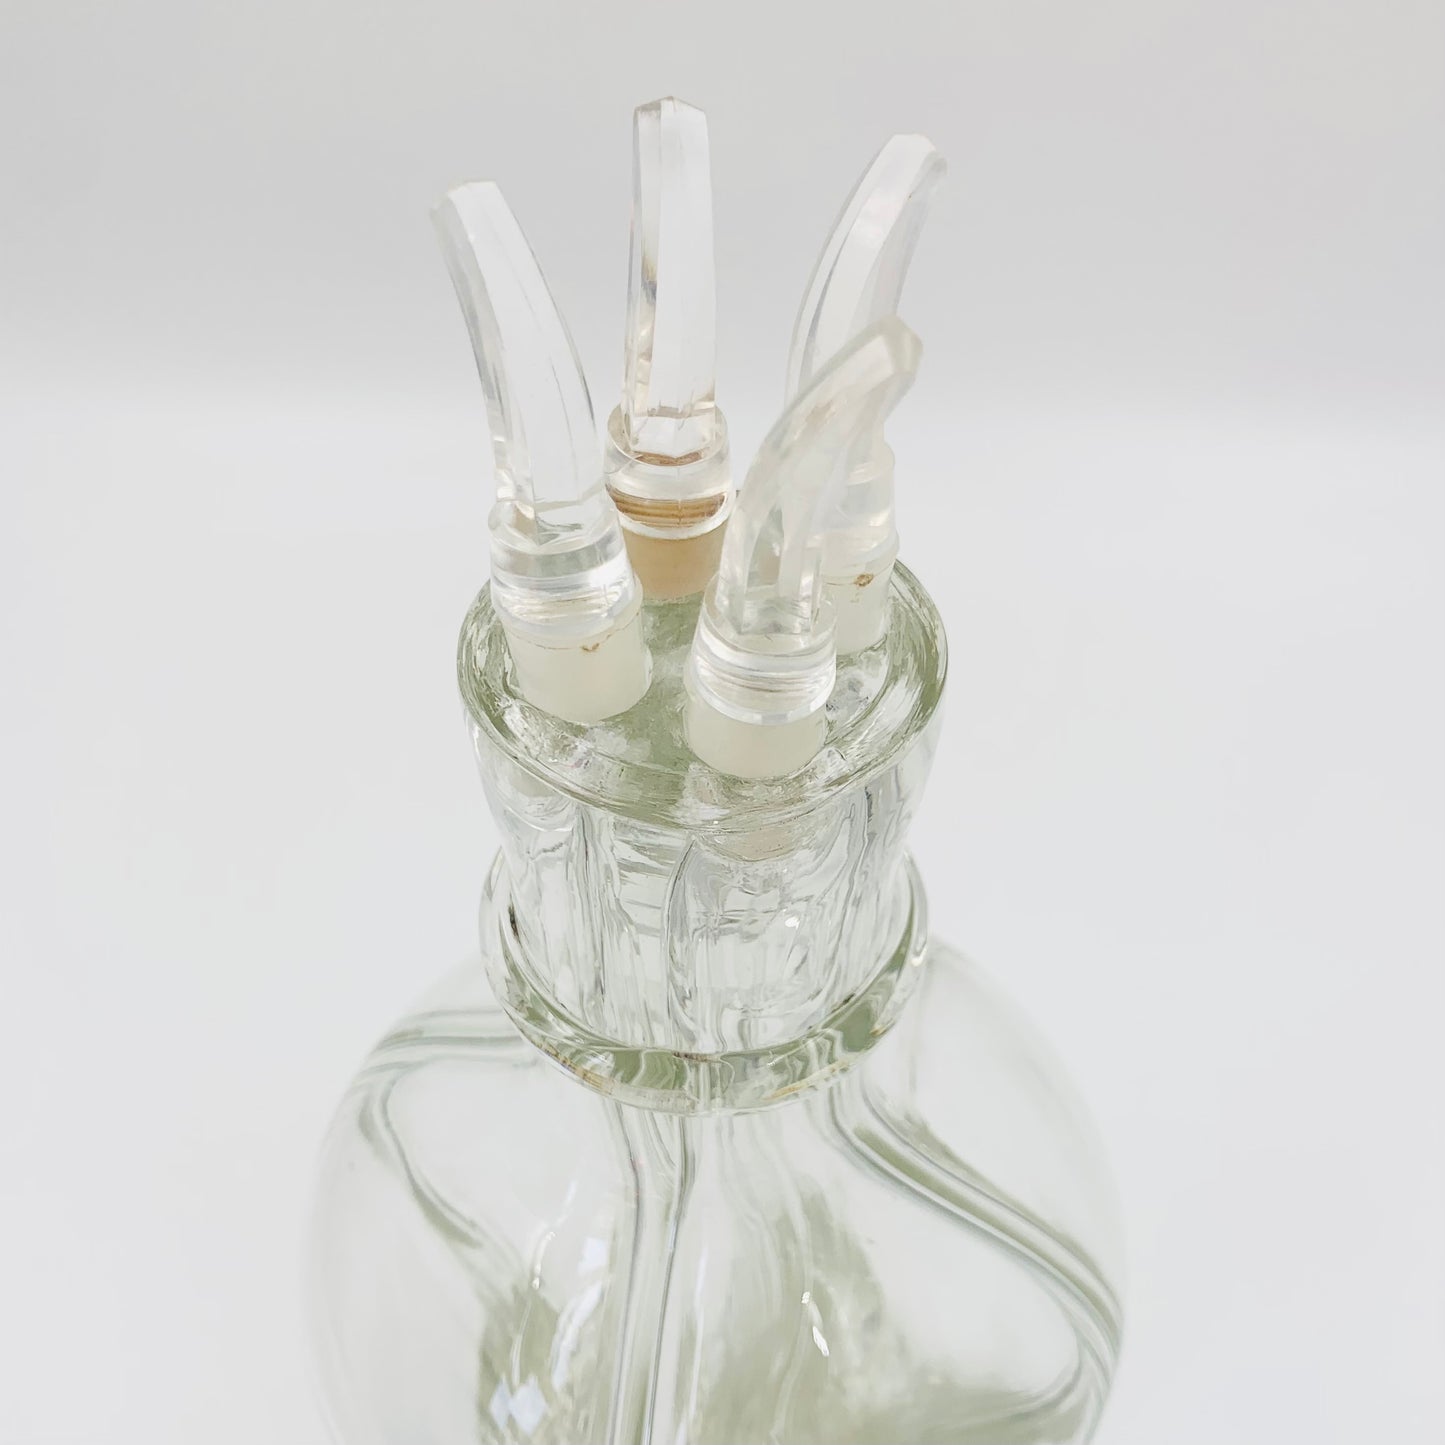 Rare French retro clear glass partitioned condiment decanter/bottle with original stopper